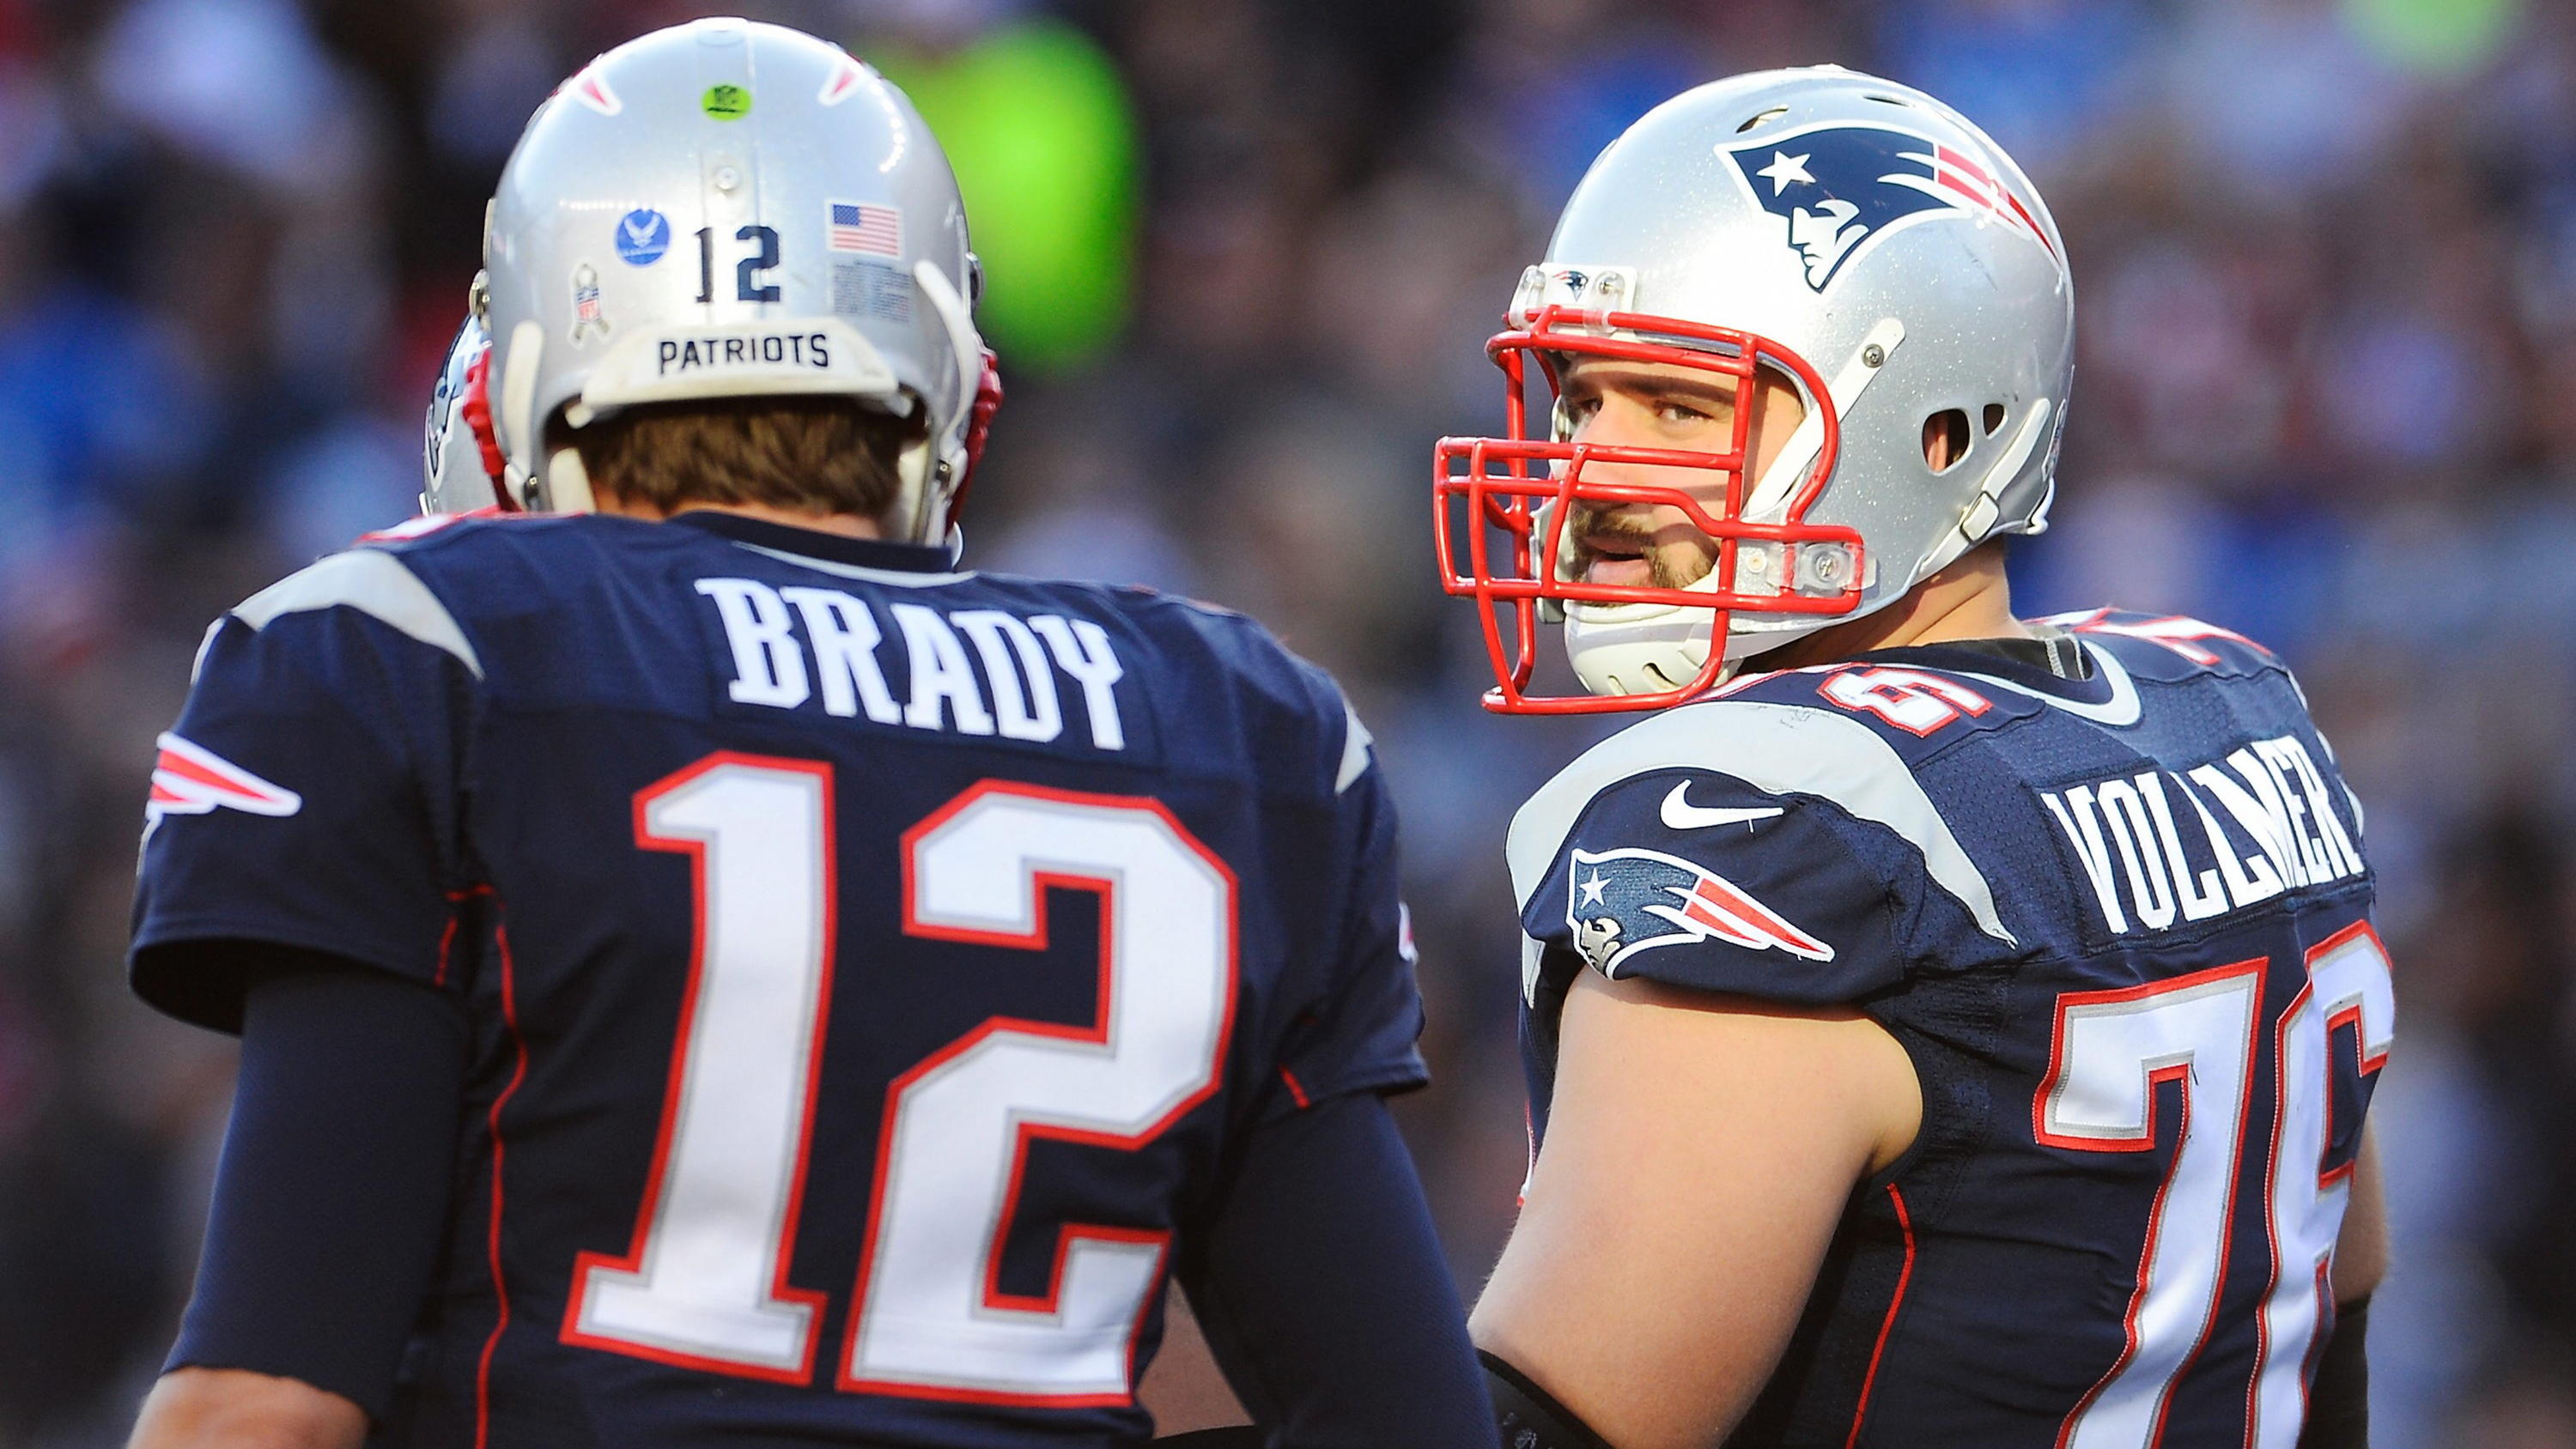 (File) New England Patriots tackle Sebastian Vollmer of Germany (R) talks with New England Patriots quarterback Tom Brady (L) before a play during the first half of the NFL American football game between the Detroit Lions and the New England Patriots